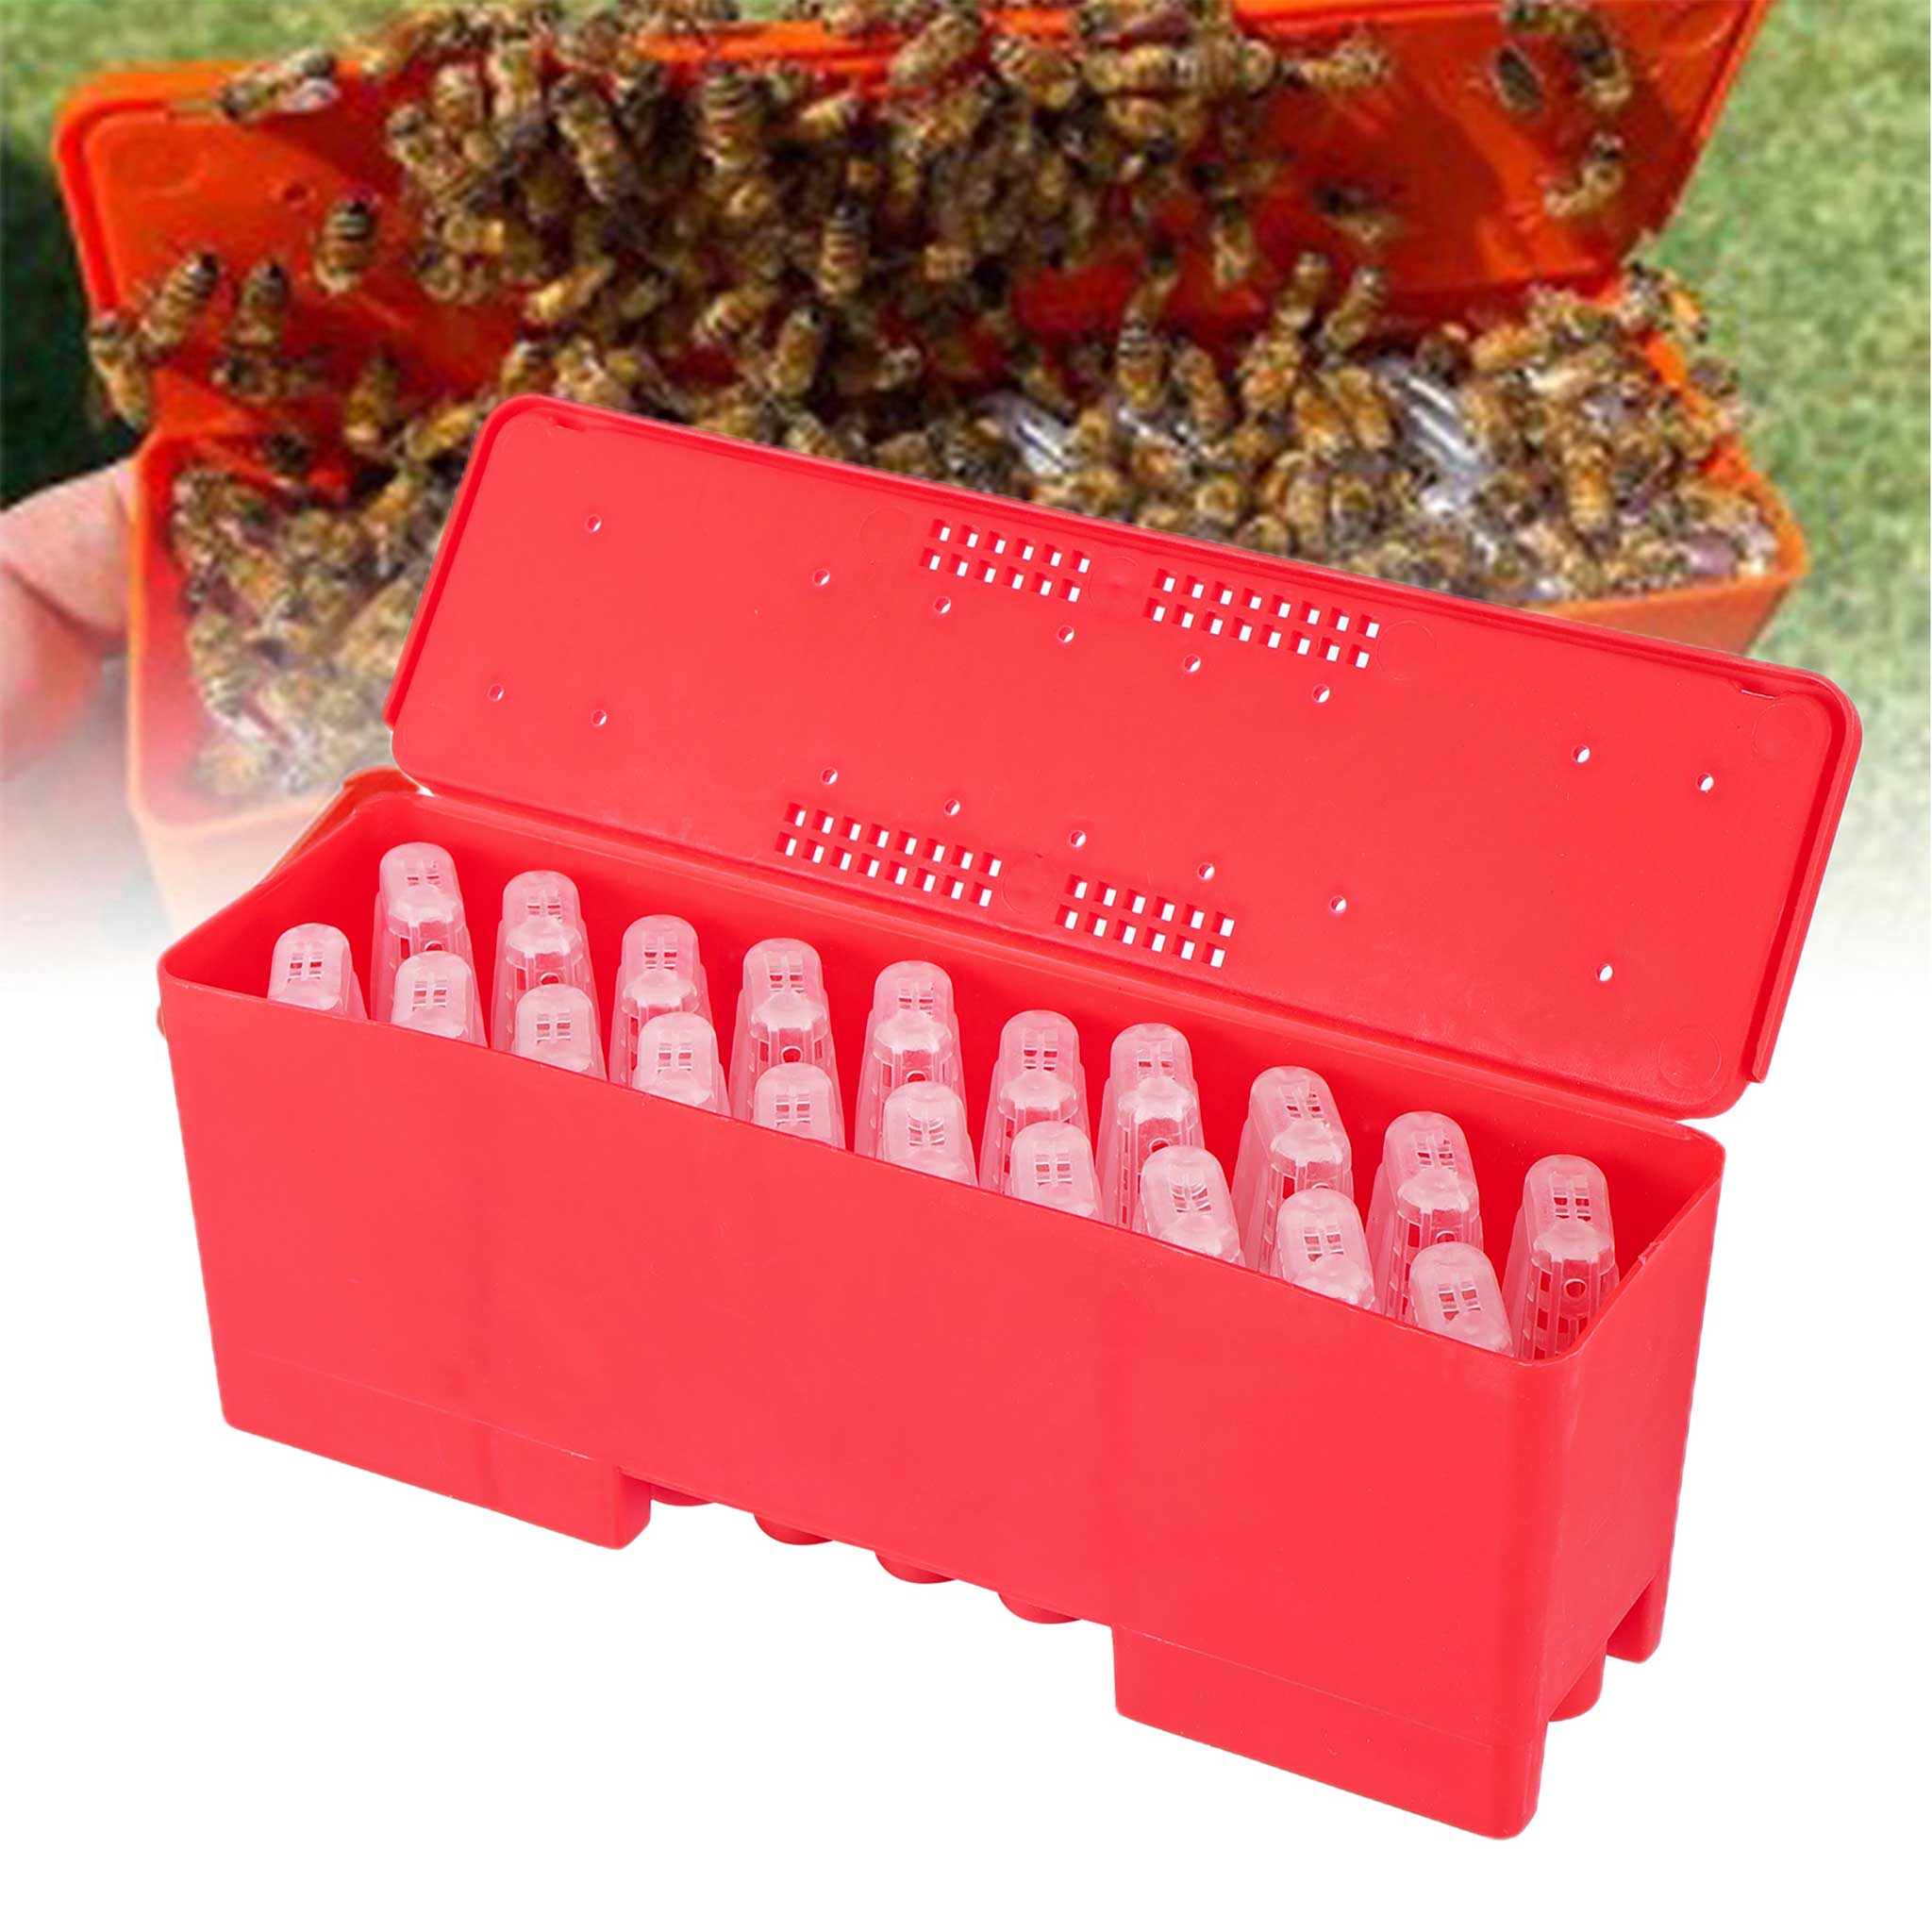 Queen Bee Battery Multi-cage Holder including 20 Cages - Queen collection by Buzzbee Beekeeping Supplies